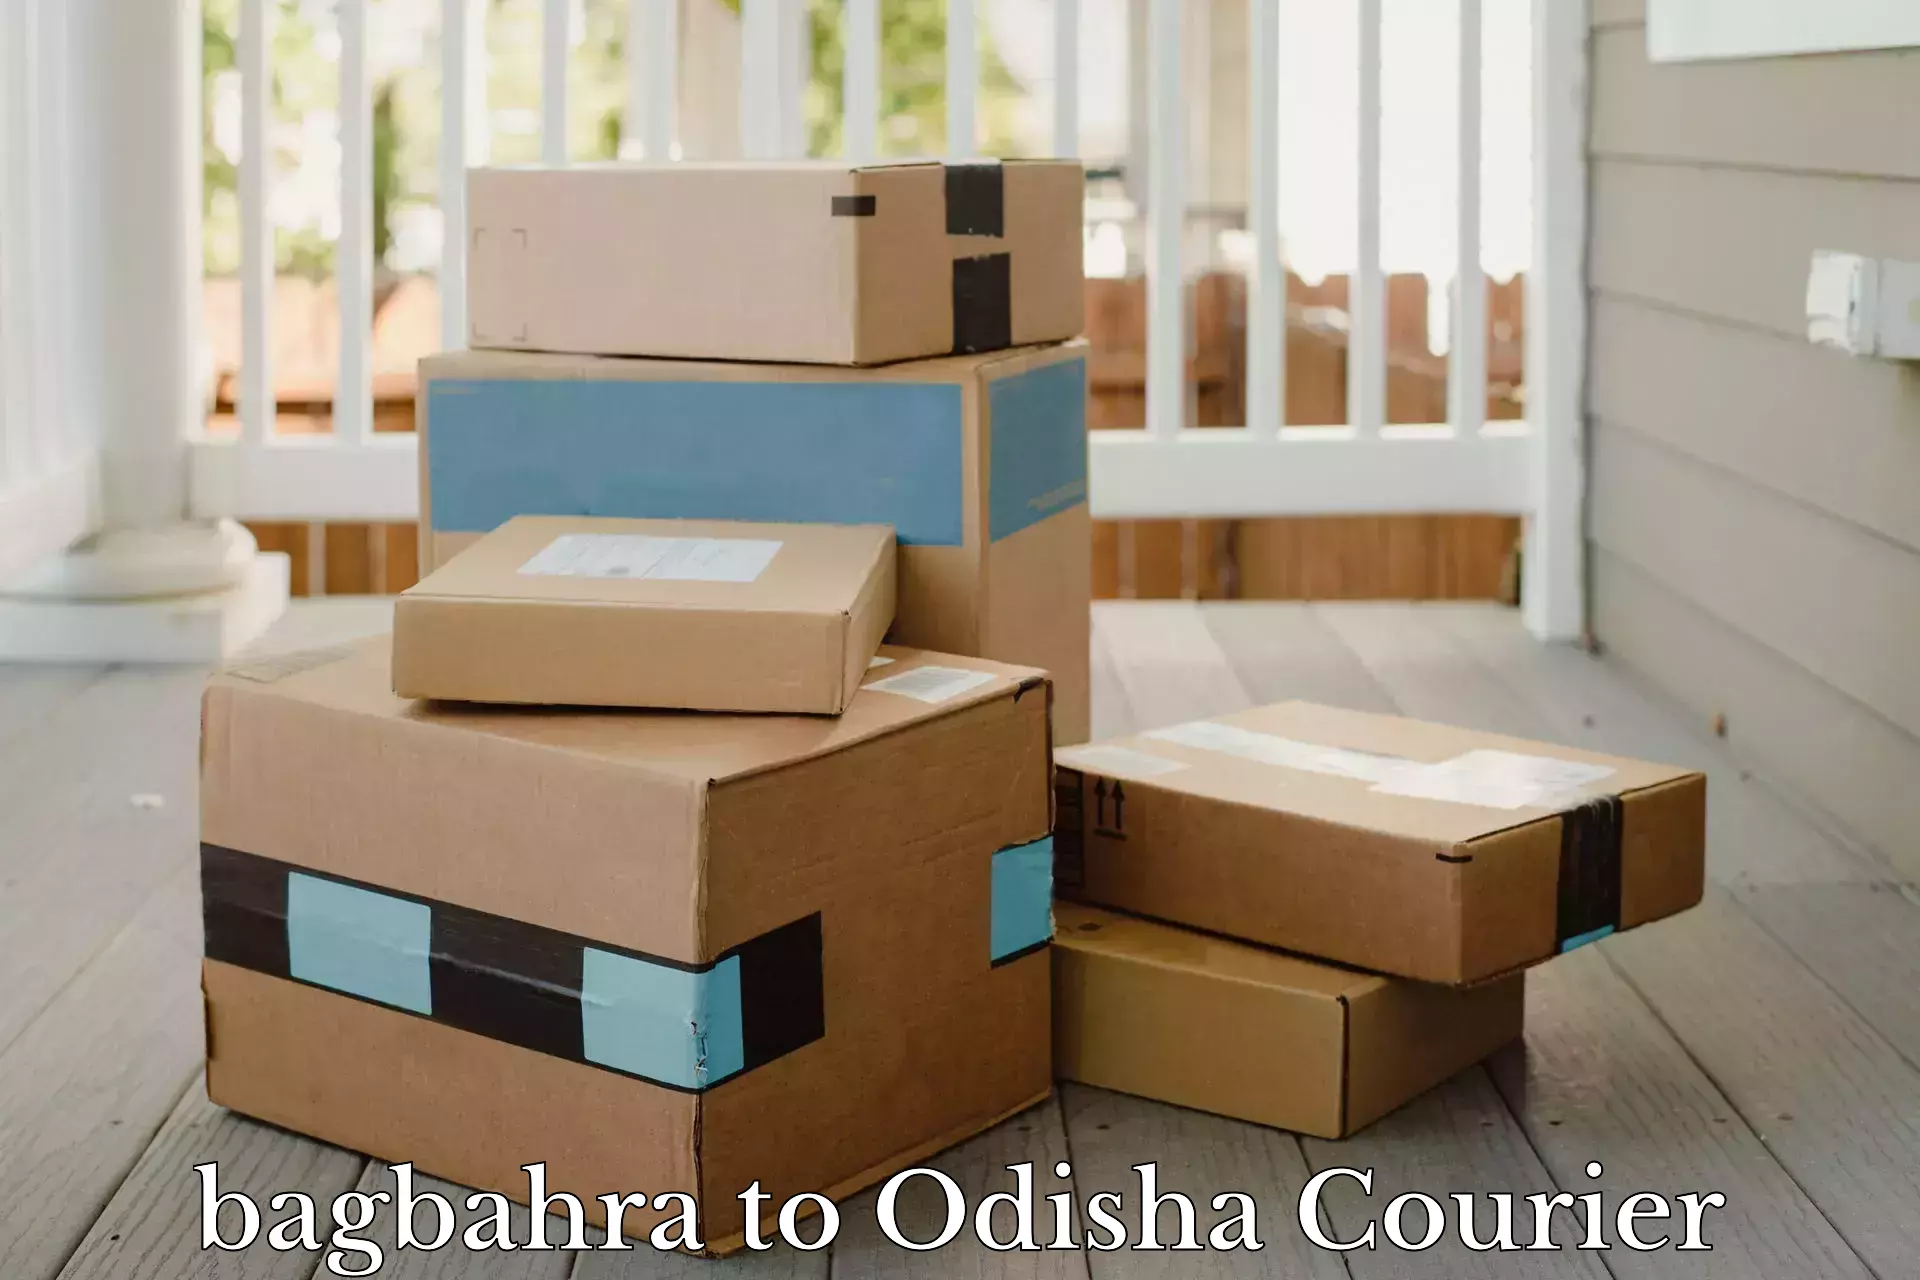 Reliable parcel services bagbahra to Bhuban